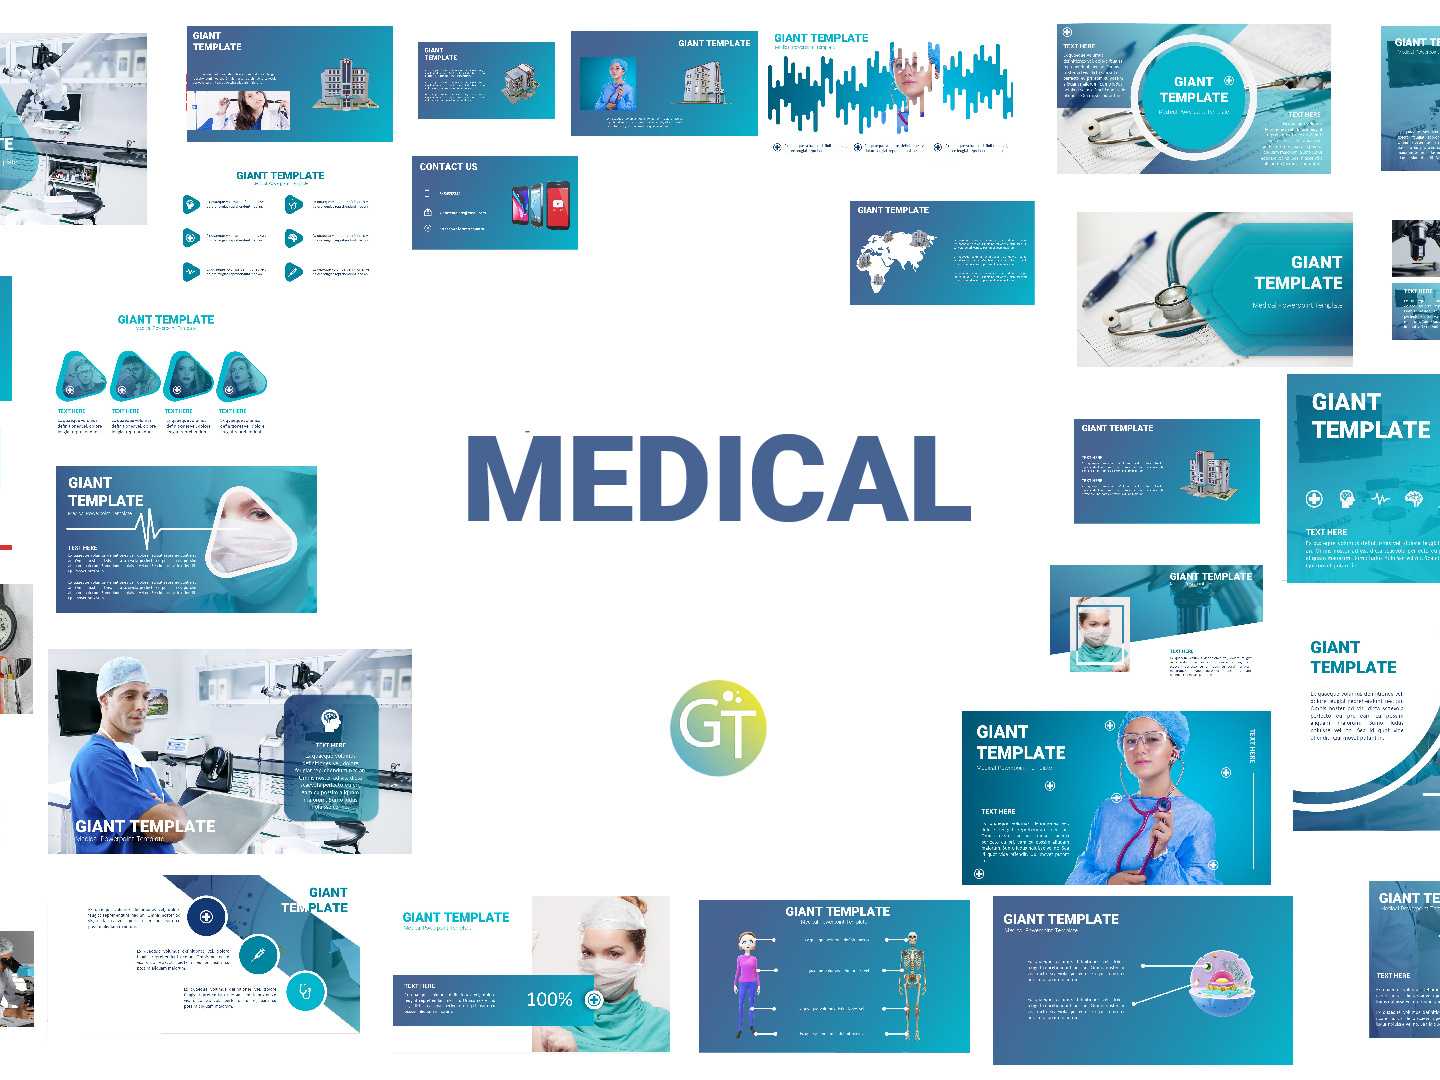 Medical Powerpoint Templates Free Downloadgiant Template Within Powerpoint Presentation Animation Templates